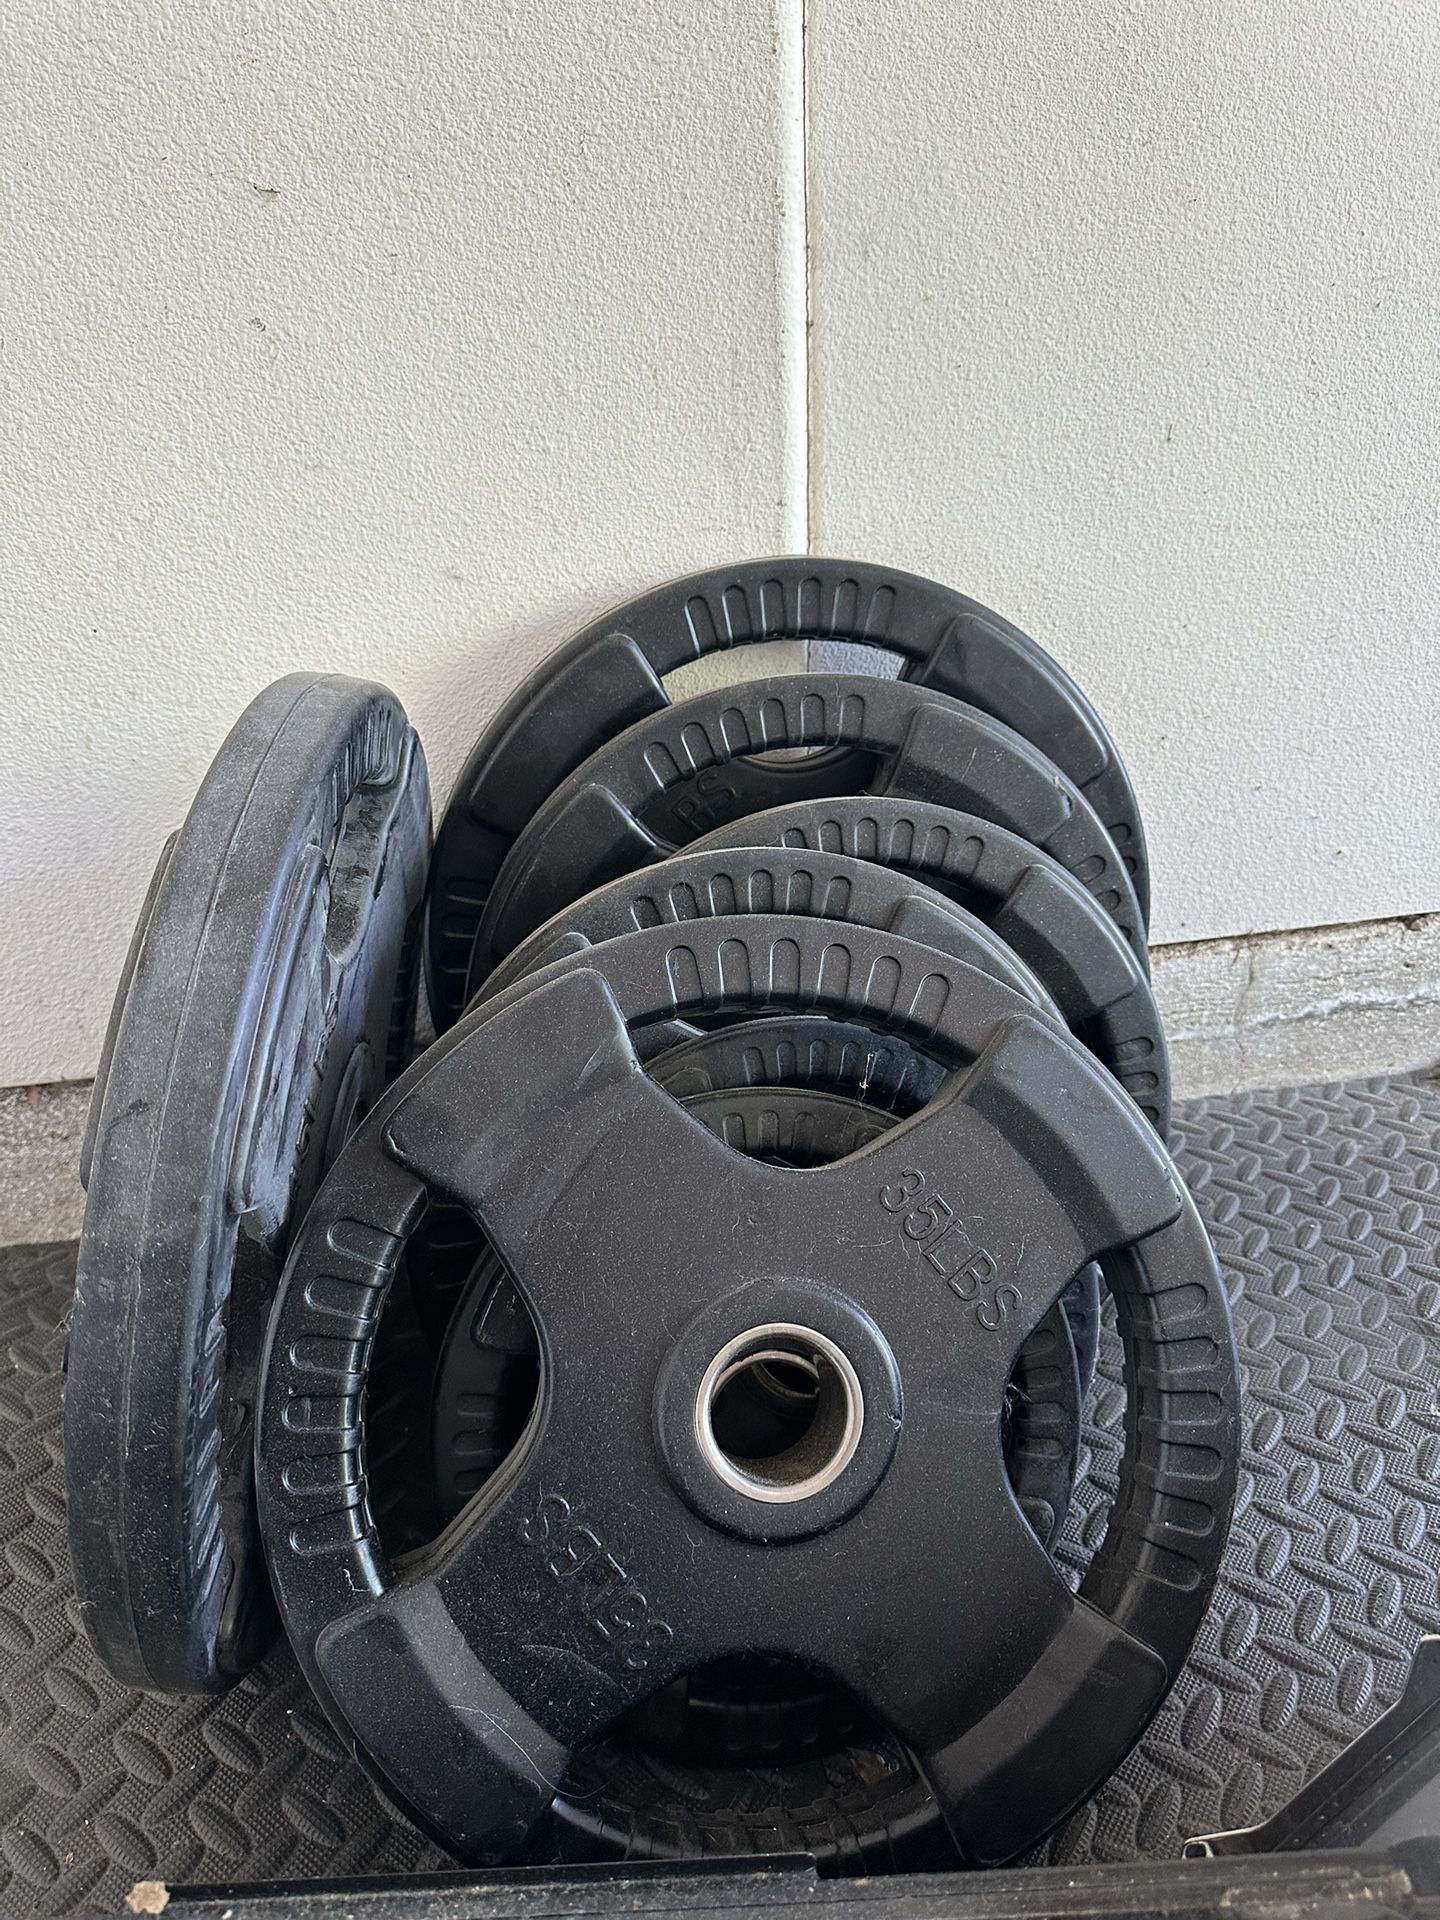 Gym Quality Weights 